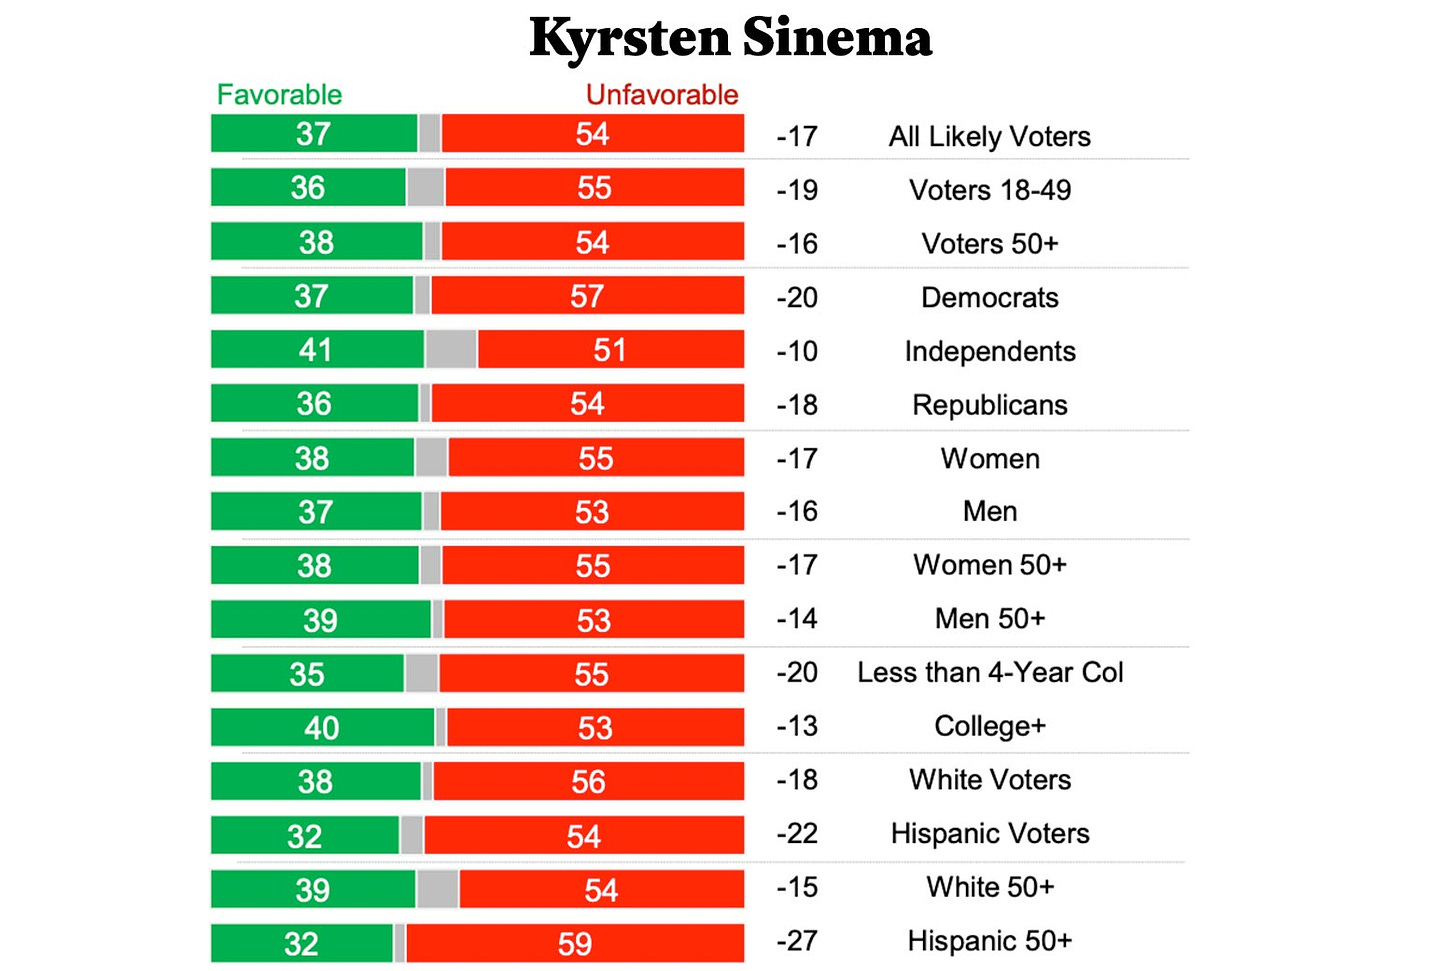 A chart showing Kyrsten Sinema's approval rating among many demographics, in which every disapproval rating is between 50 and 60 percent.